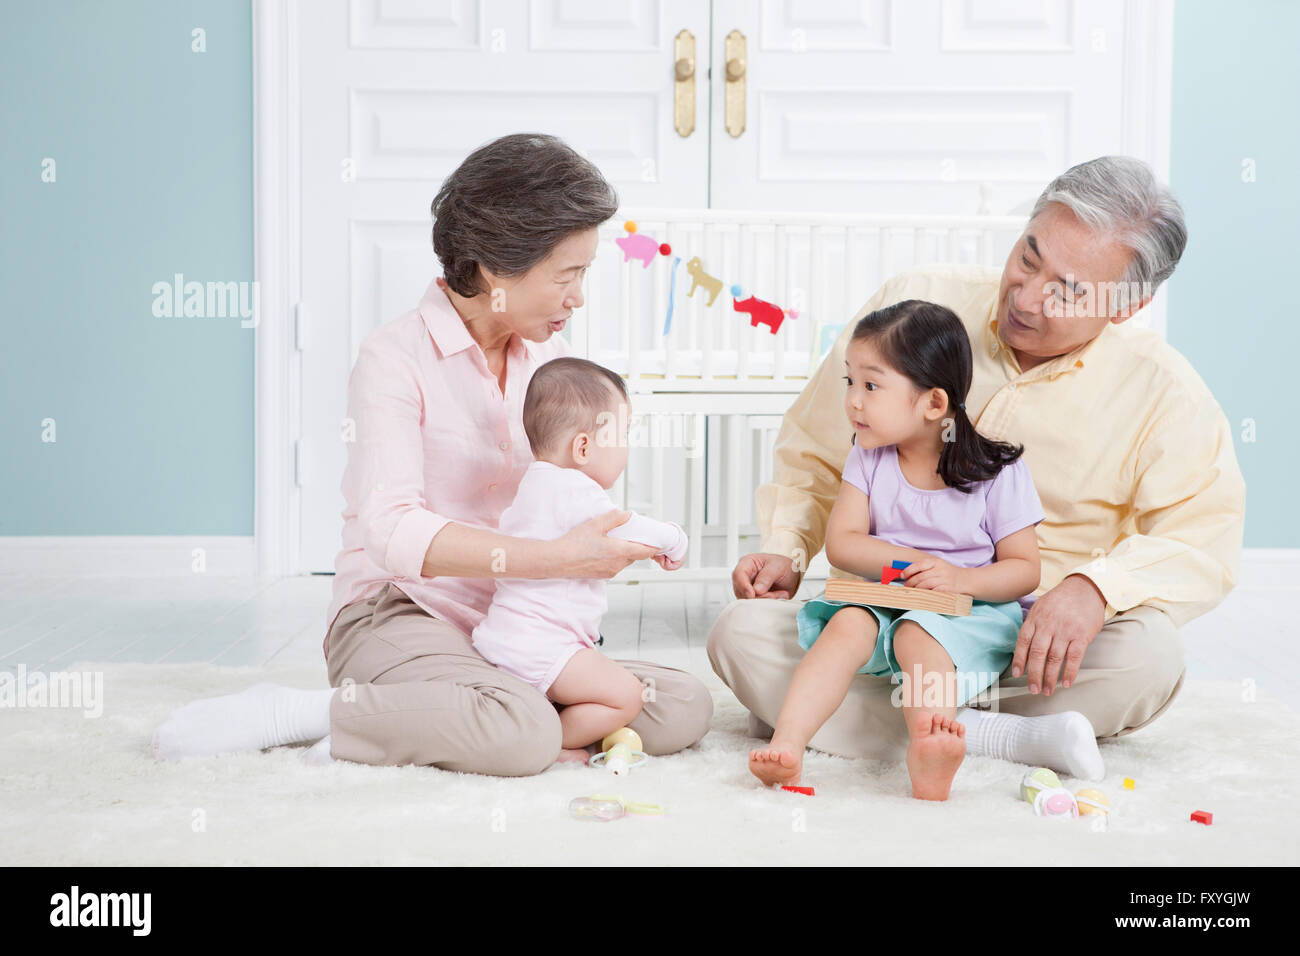 Grandparents and grandchildren having fun with toys together all seated on the floor in a room Stock Photo